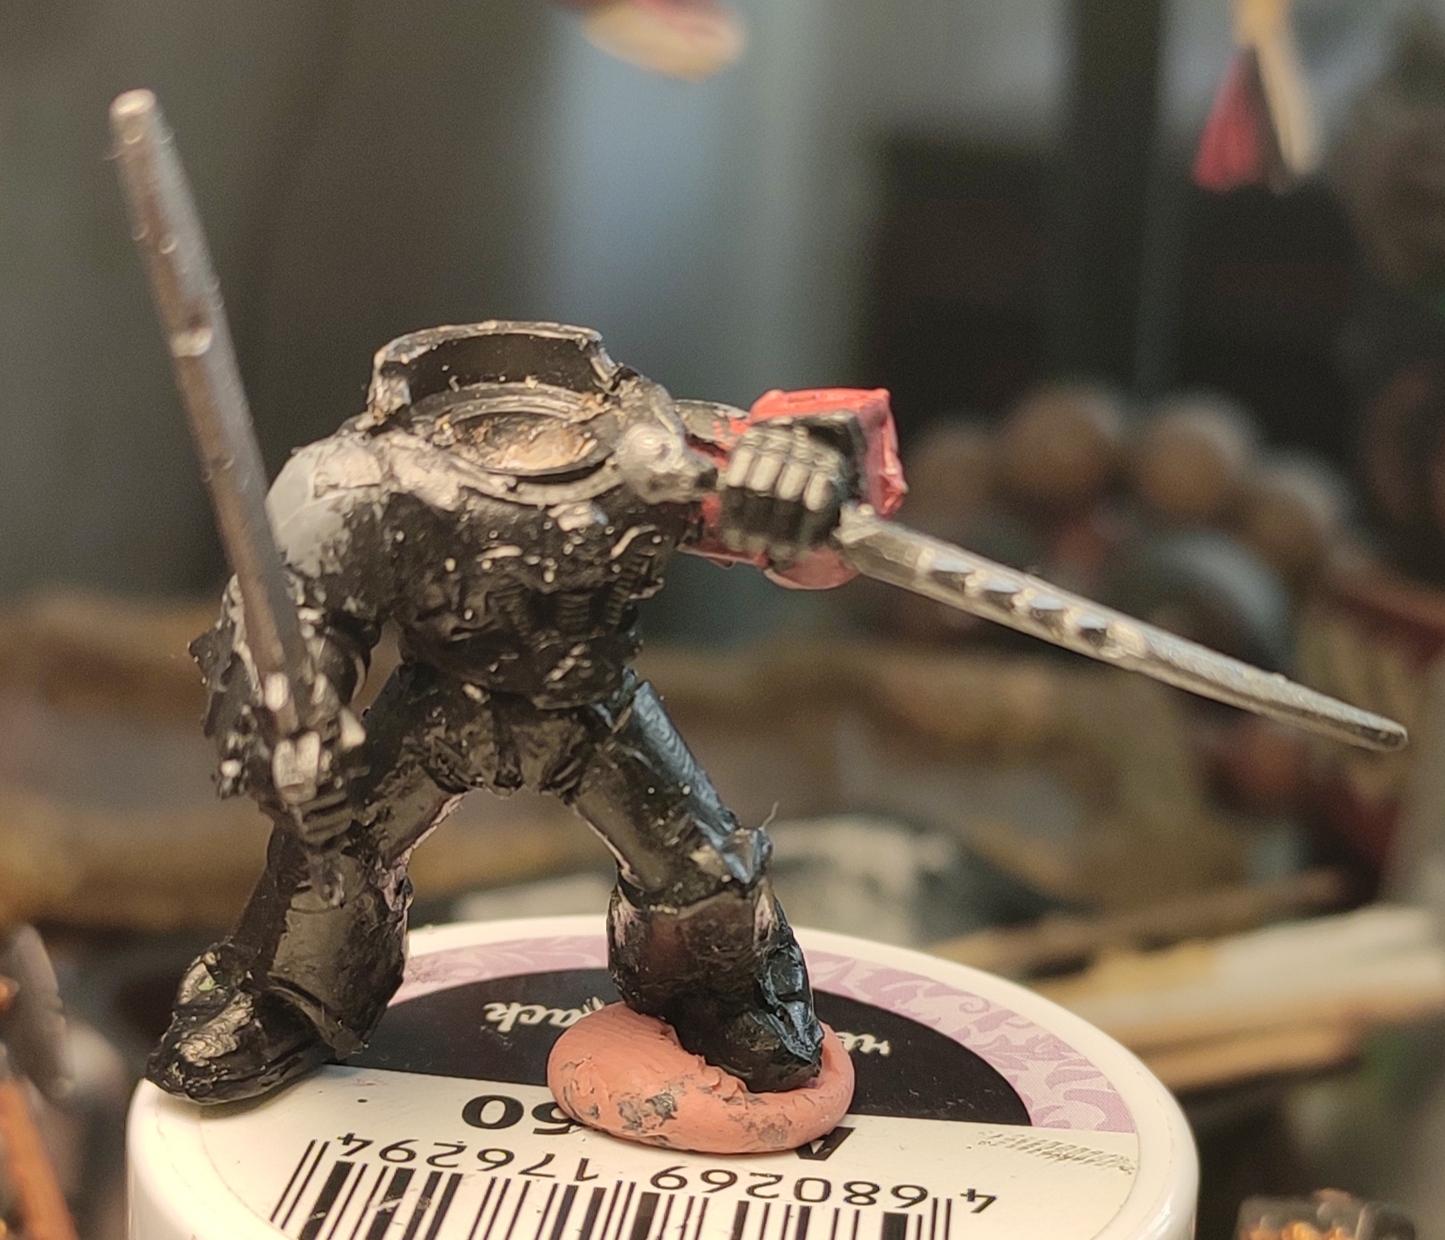 Casting, Chaos, Chaos Space Marines, Conversion, Dagger, Duelist, Epoxy, Heresy, Heretic Astartes, Infantry, Kitbash, Putty, Sword, Traitor Legions, Warhammer 40,000, Work In Progress